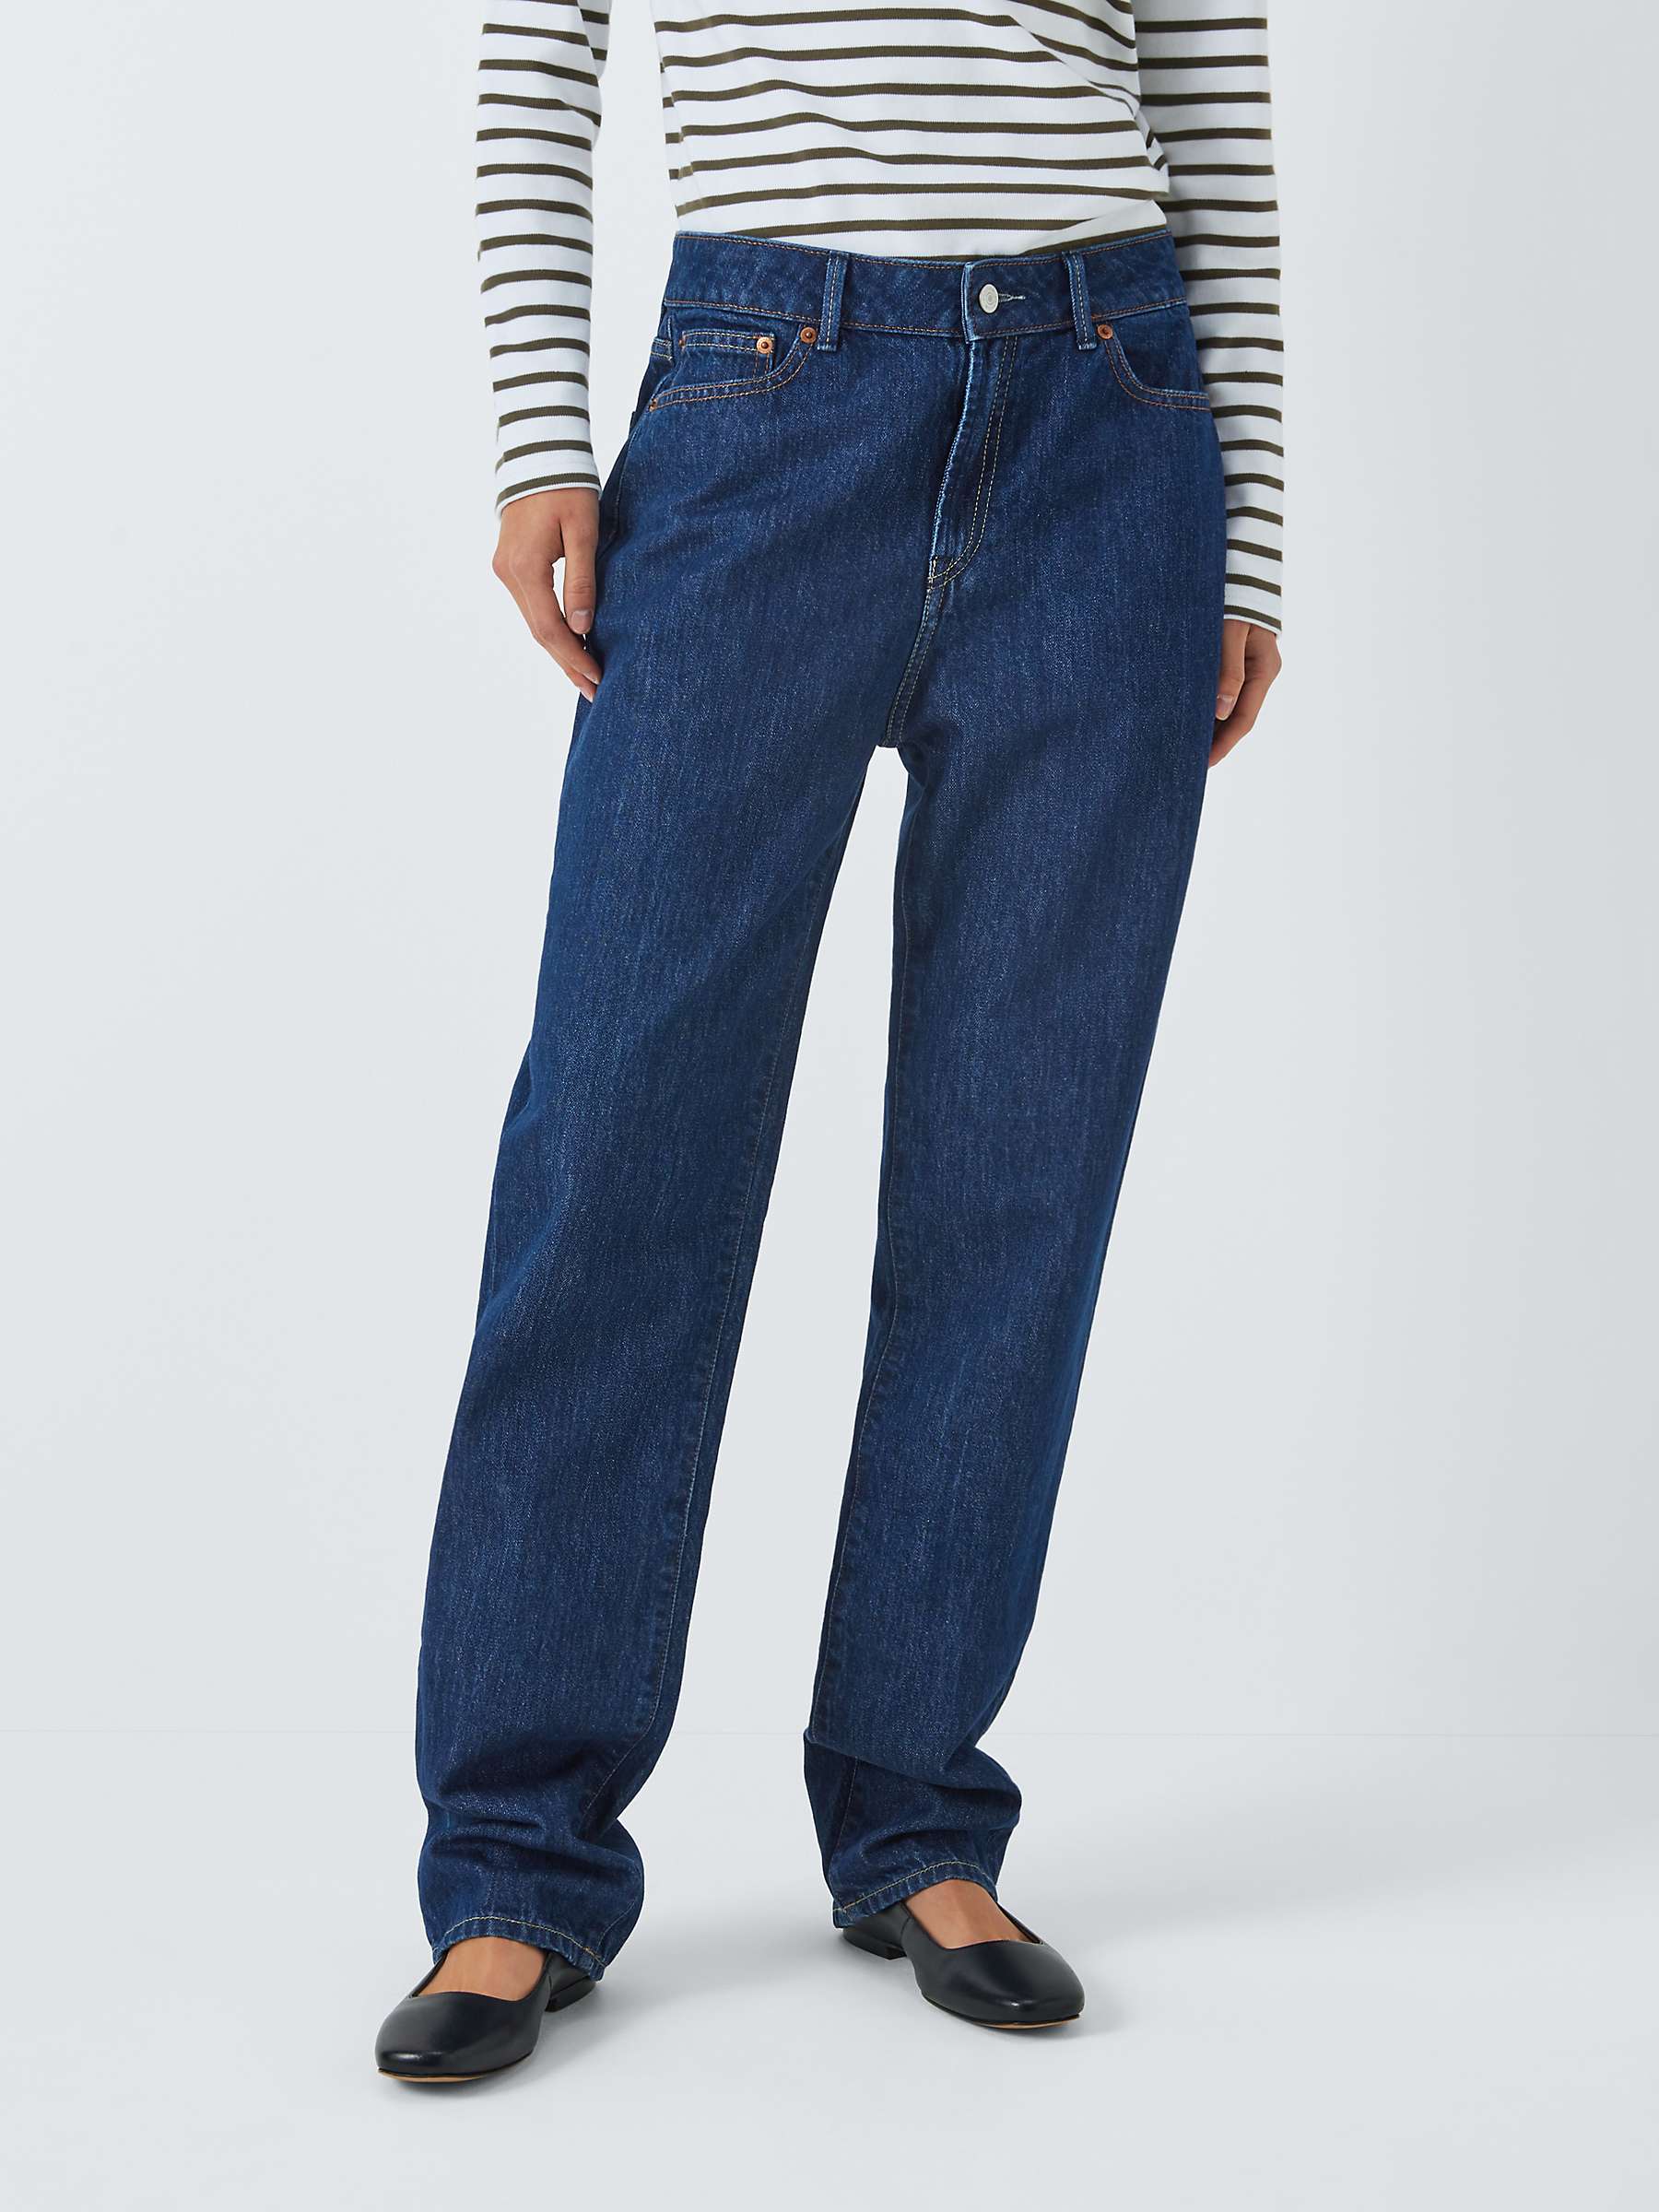 Buy Armor Lux Straight Leg Jeans, Blue Online at johnlewis.com